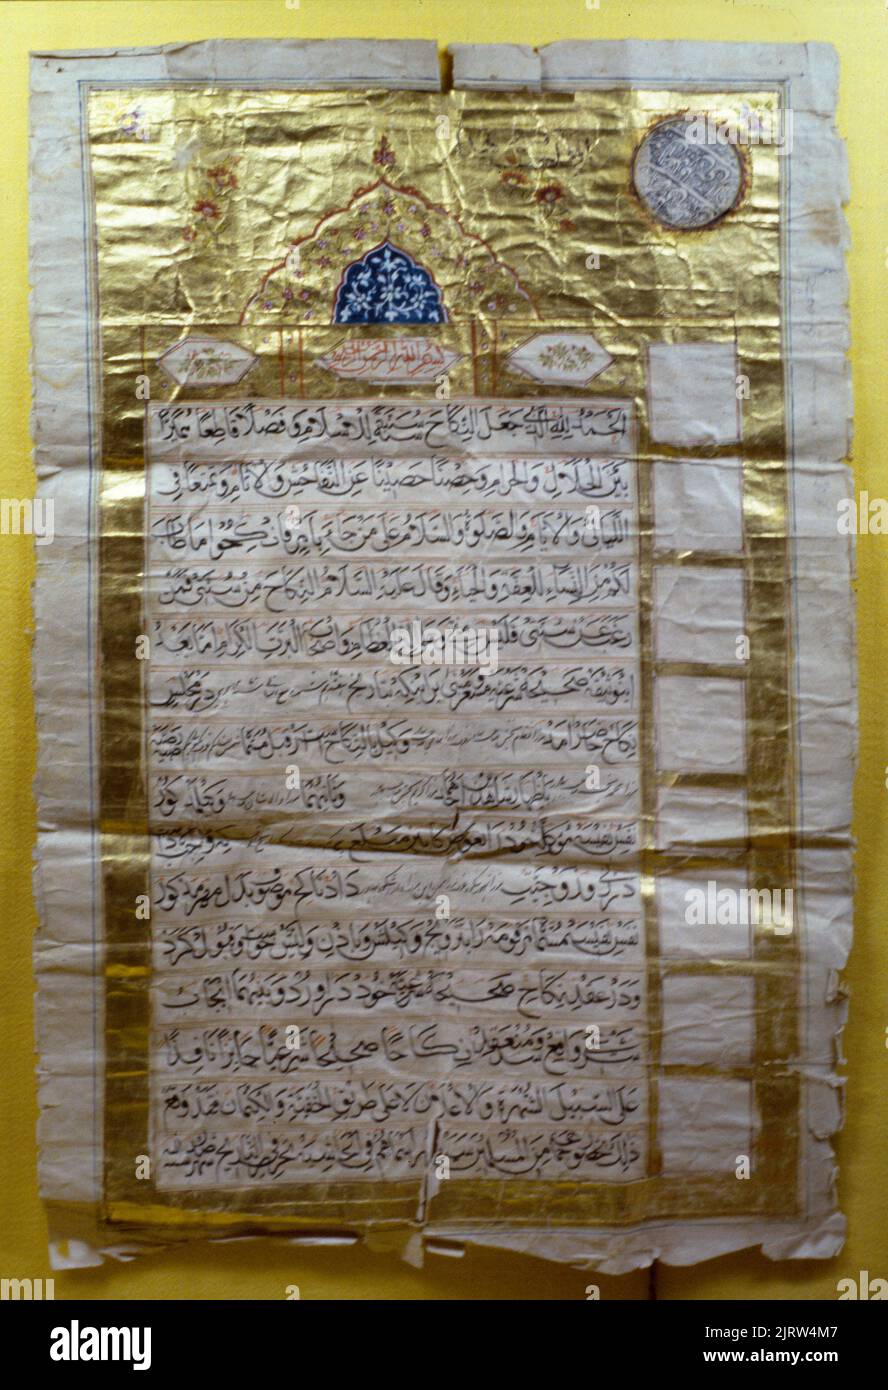 Early Quran Manuscript Hanging Not Touching Ground Stock Photo